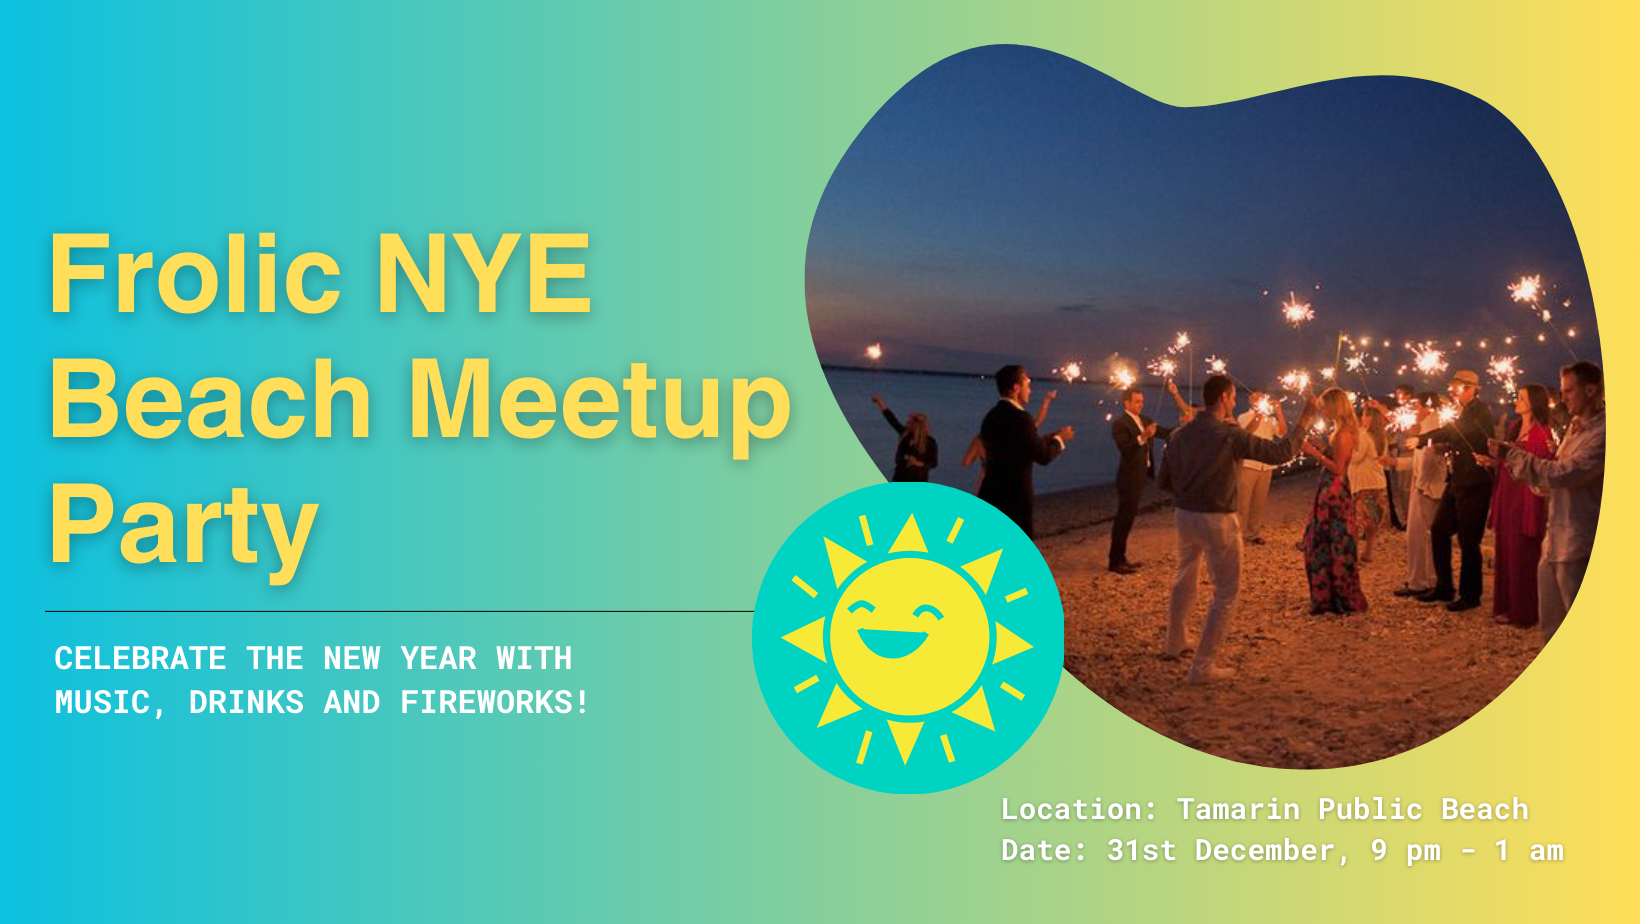 NYE Eve meetup party